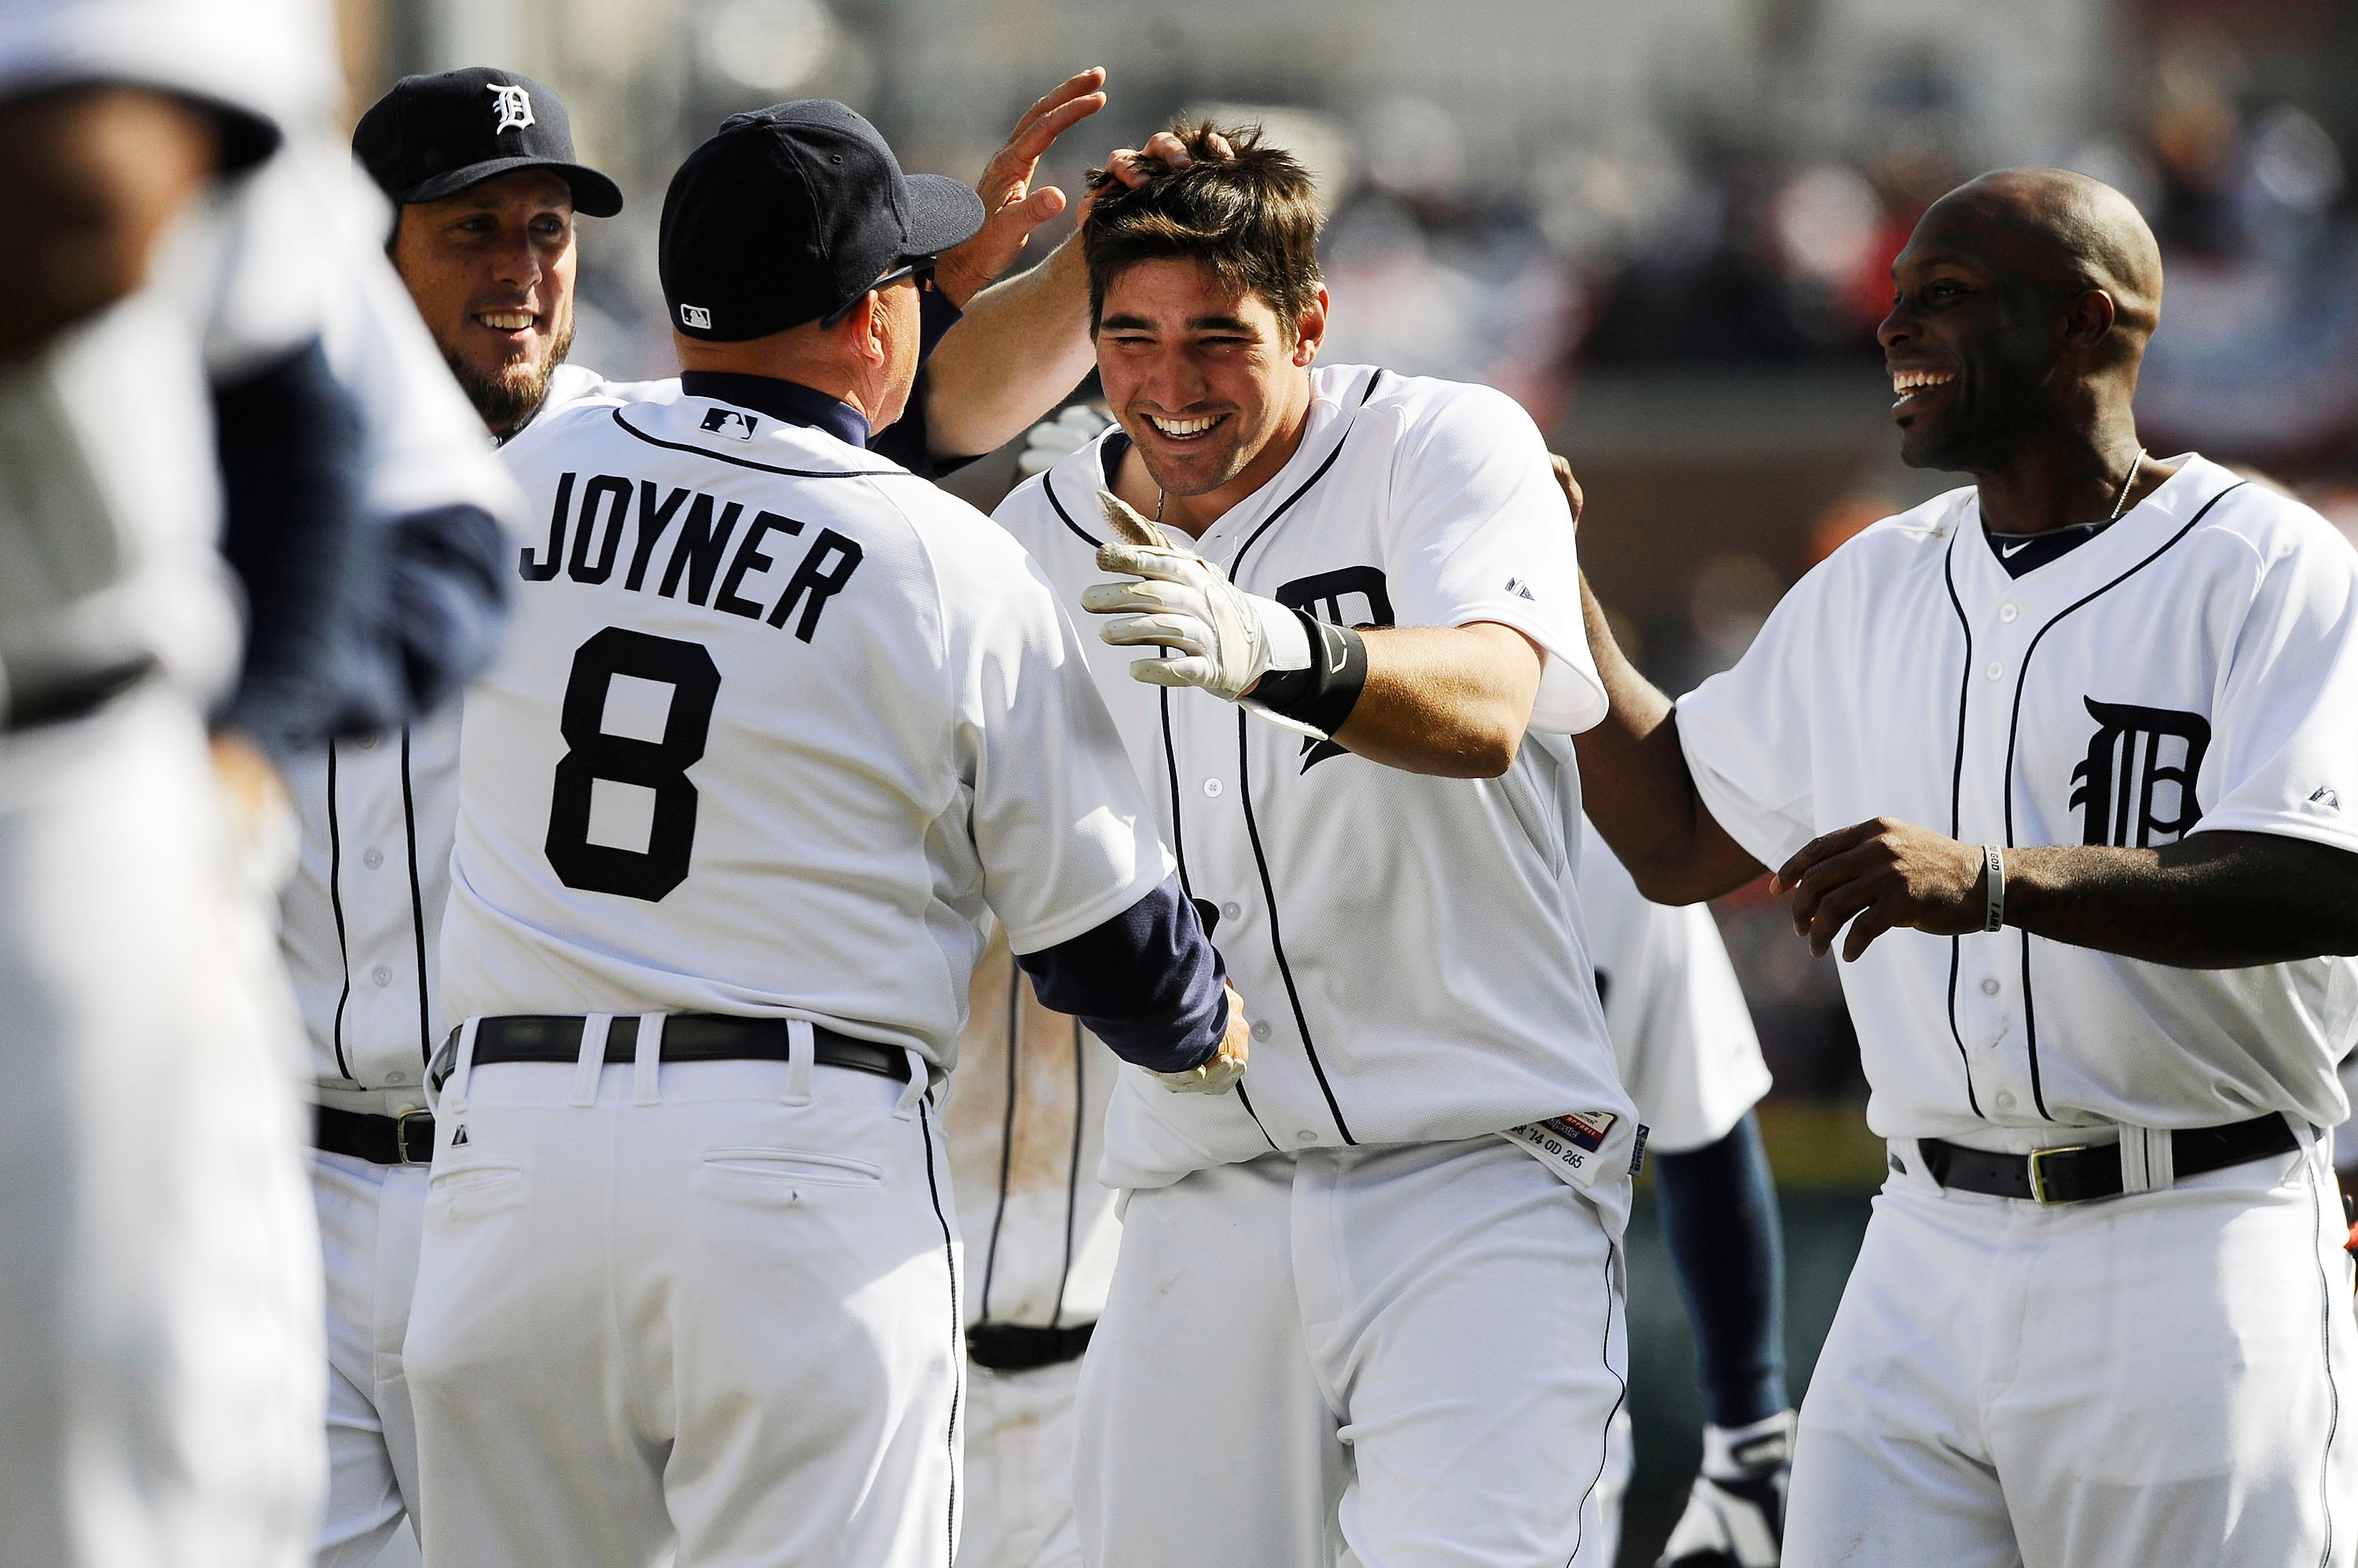 Tigers' Nick Castellanos is congratulated after his season opener debut in the Tigers 4-3 win. Photos of Detroit Tigers Opening Day on Monday, March 31, 2014 at Comerica Park in Detroit.